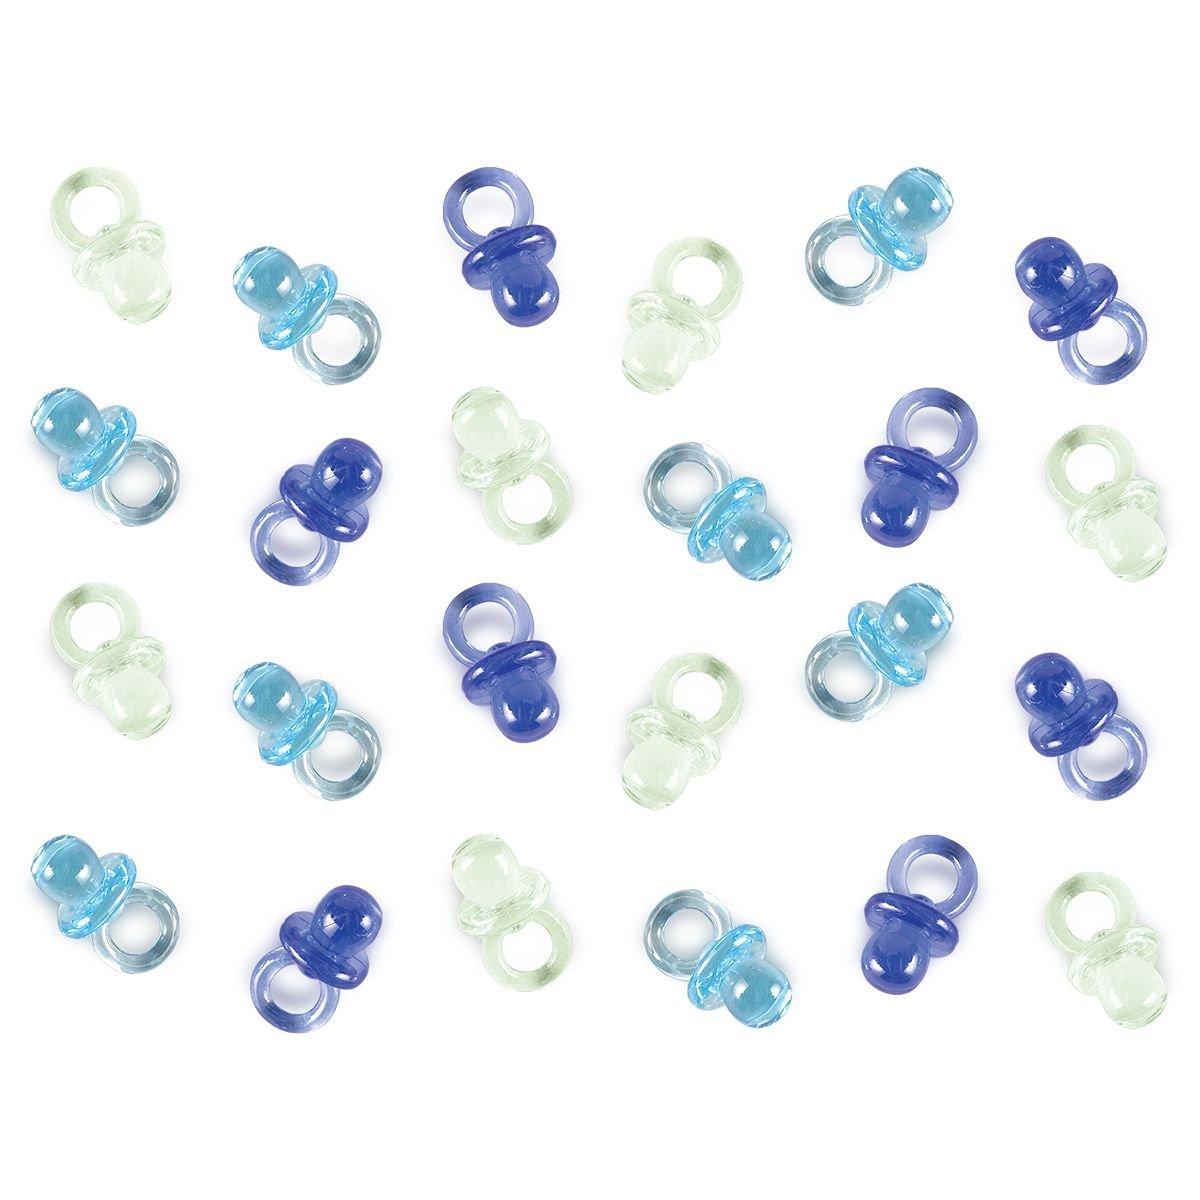 Mini Blue Pacifier Baby Shower Favor Charms 24ct